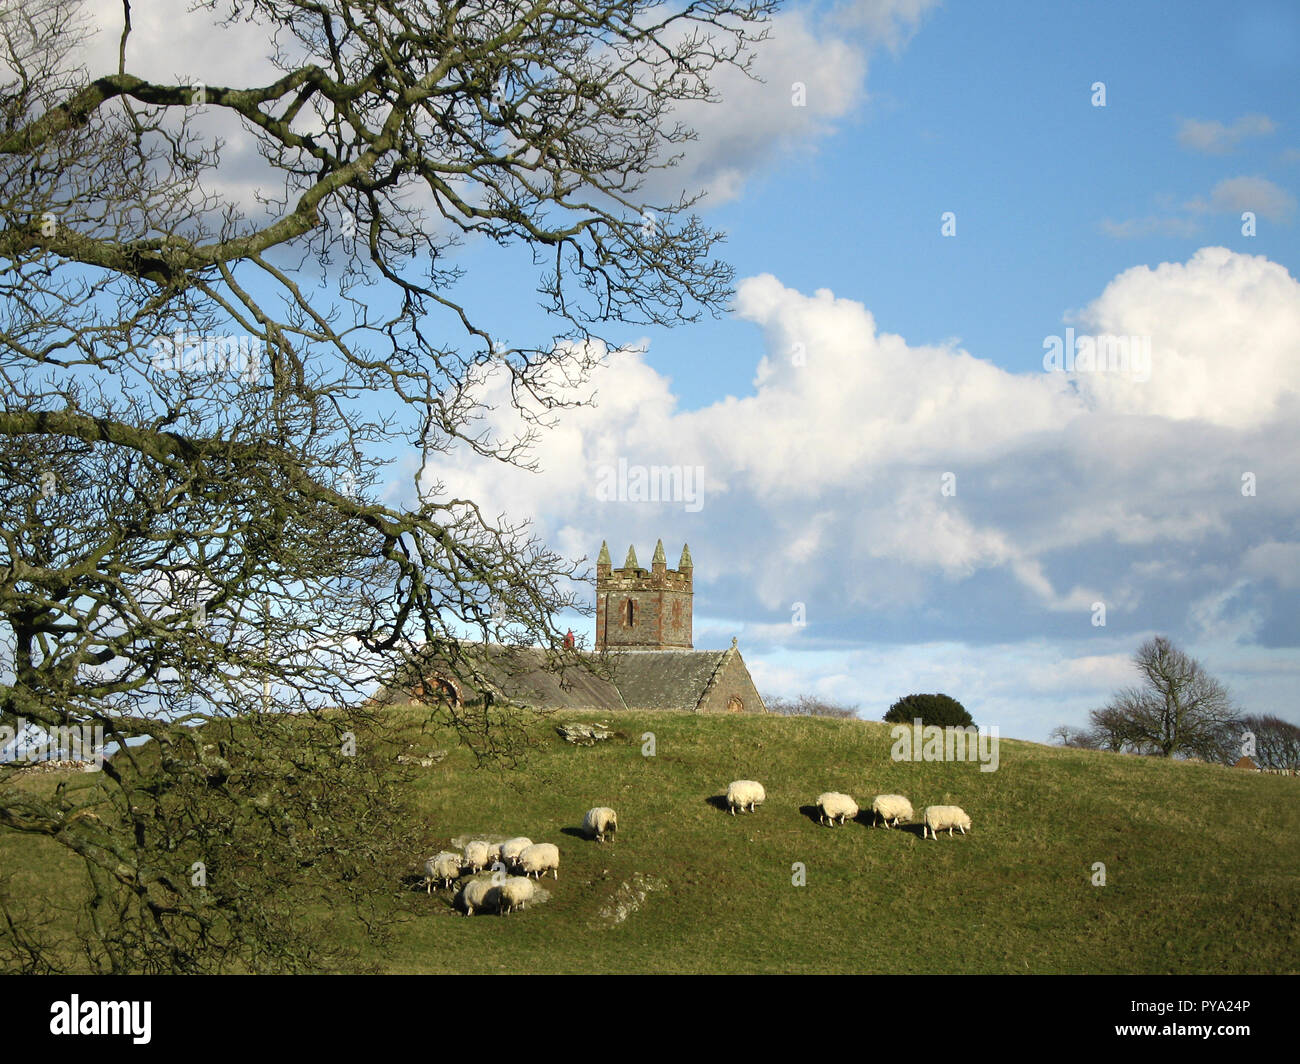 Borgue Church, Borgue, near Kirkcudbright, Dumfries and Galloway, SW Scotland. A flock of white sheep graze on the hill in front of the church Stock Photo